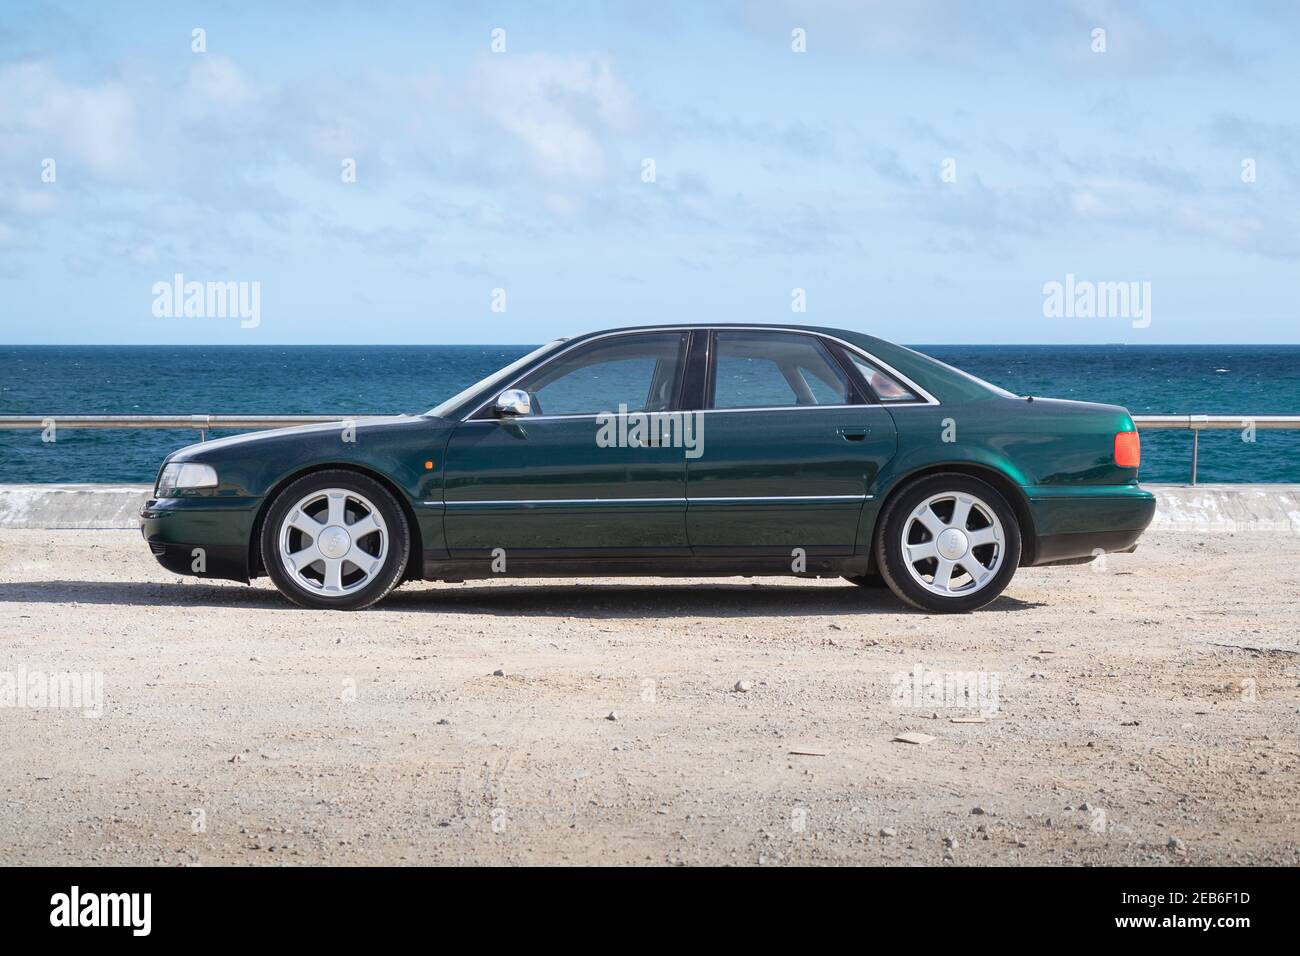 Barcelona Spain February 2 21 Audi S8 First Generation D2 1996 03 Parking Next To Sea Stock Photo Alamy